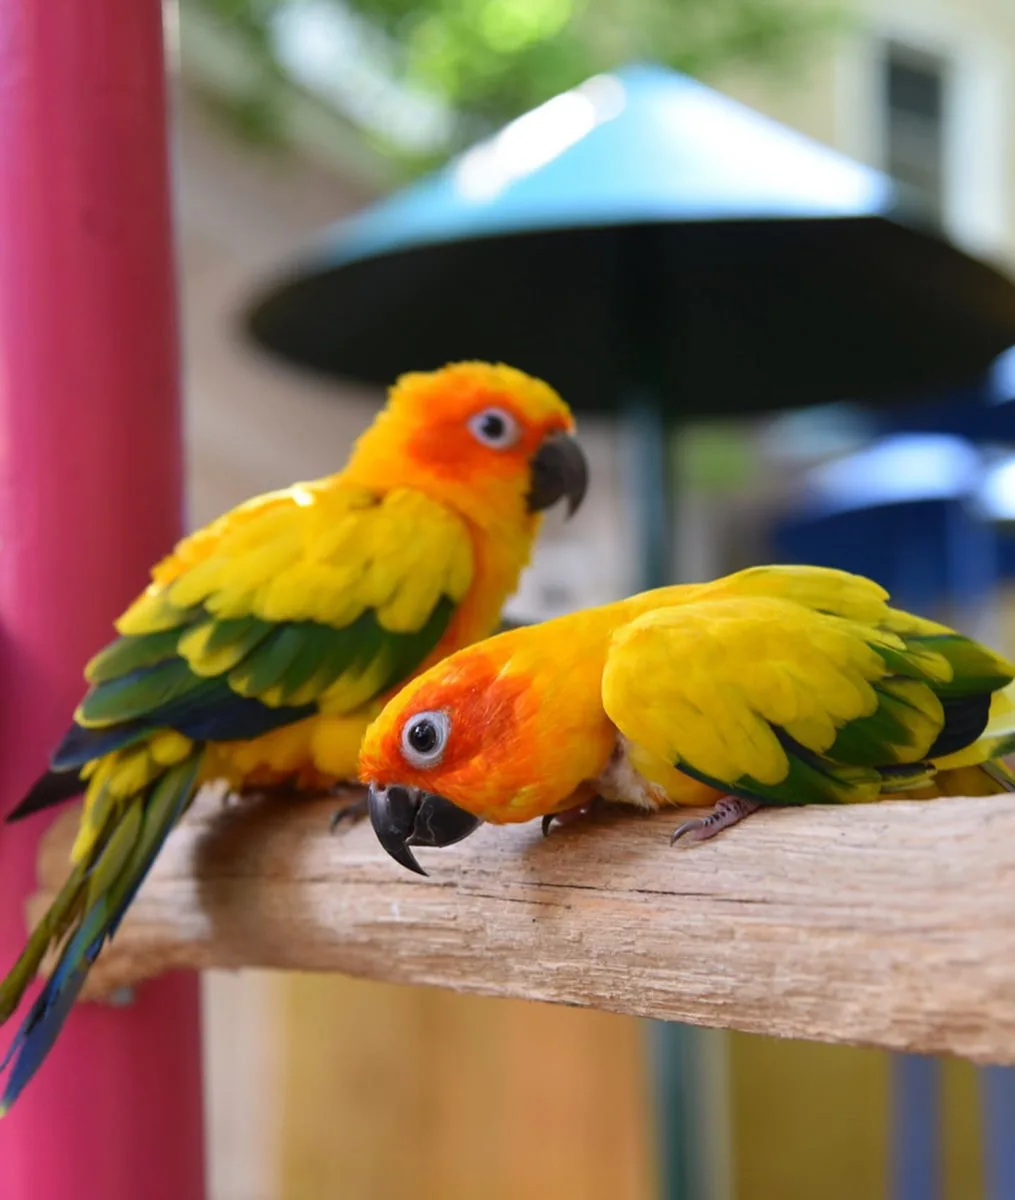 Sun Conure Parrots at Parrot Mountain in Pigeon Forge Tn 